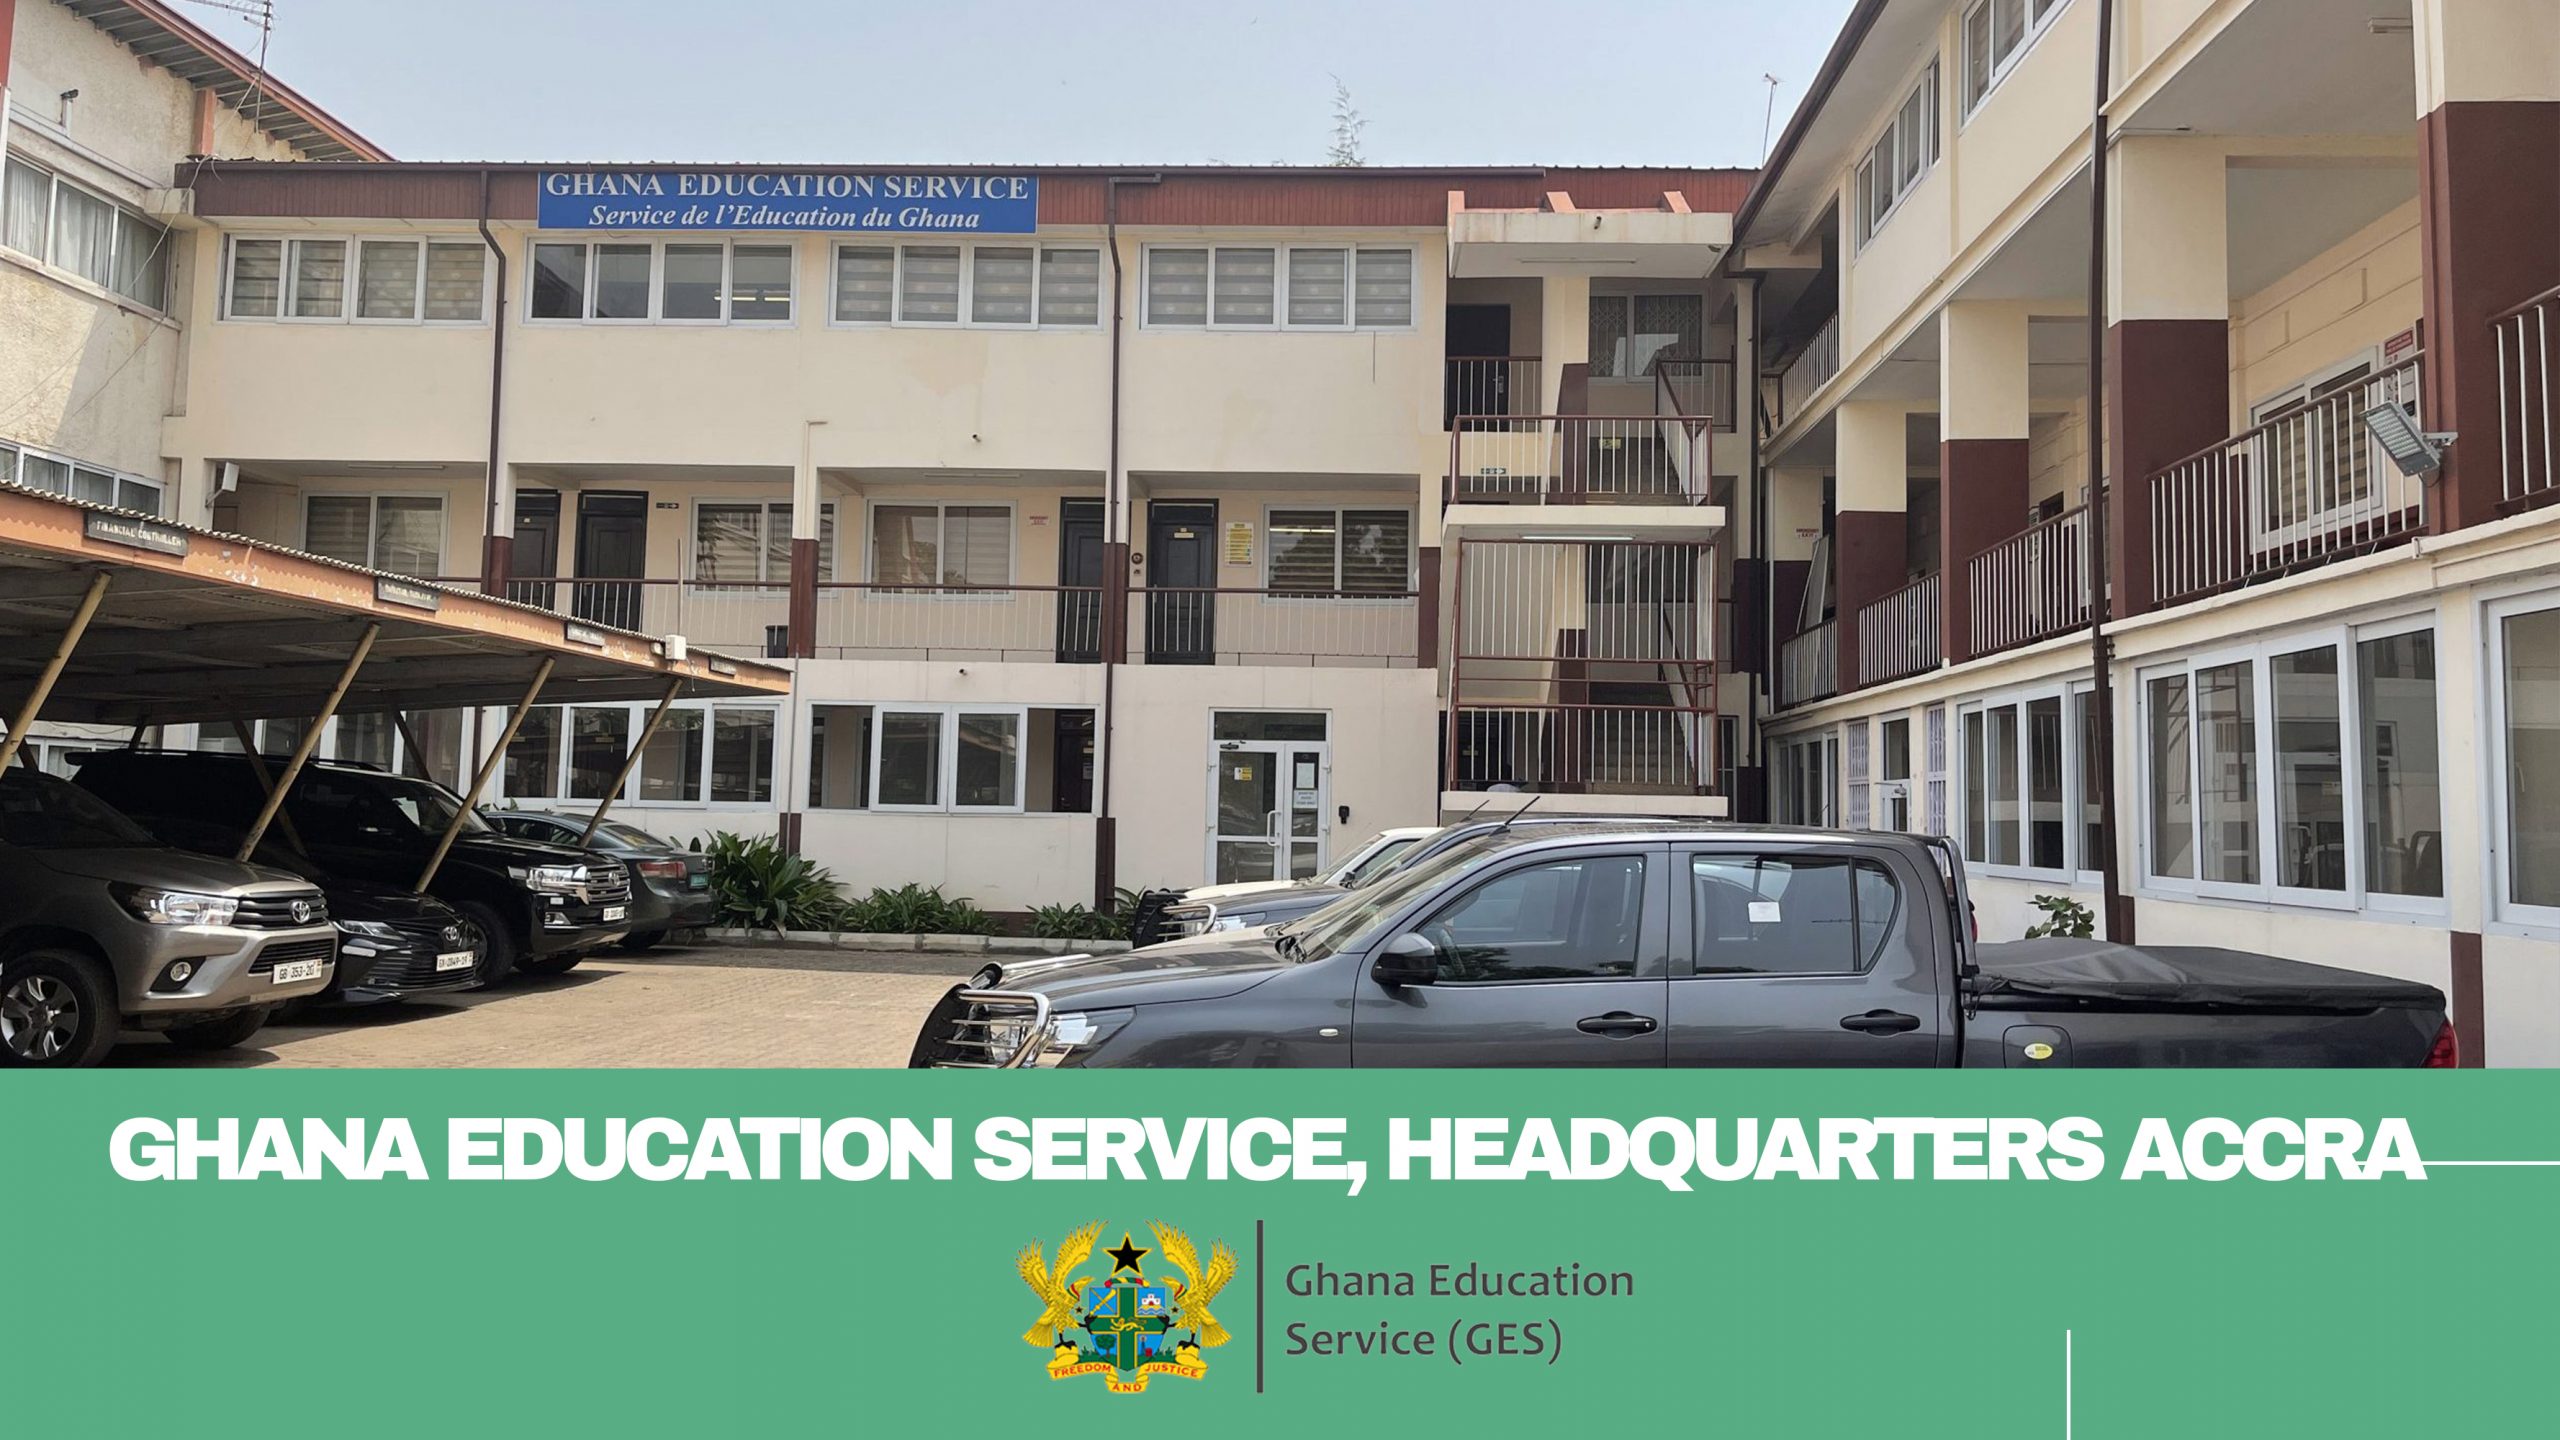 mission statement of ghana education service